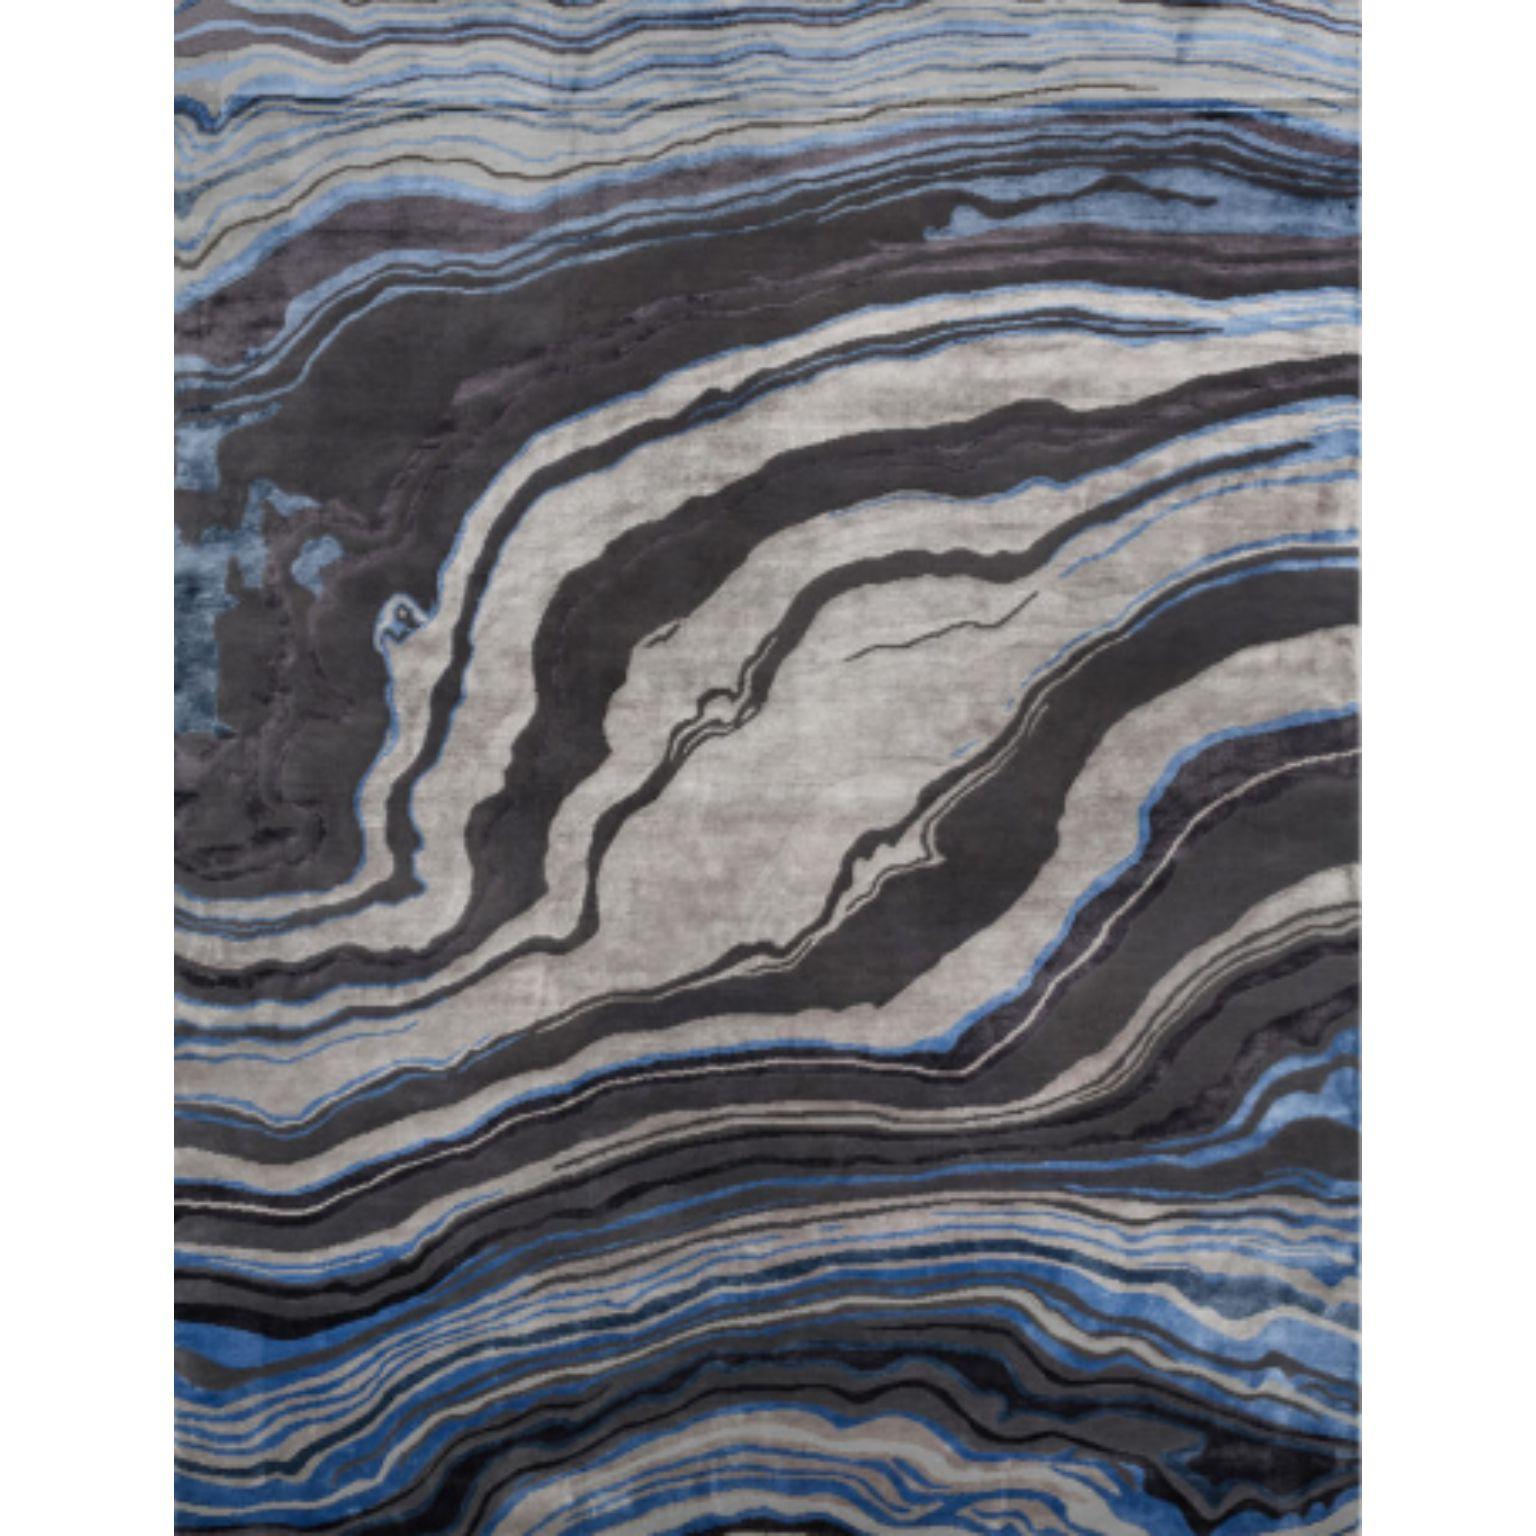 FLOW 200 rug by Illulian
Dimensions: D300 x H200 cm 
Materials: Wool 50%, Silk 50%
Variations available and prices may vary according to materials and sizes. 

Illulian, historic and prestigious rug company brand, internationally renowned in